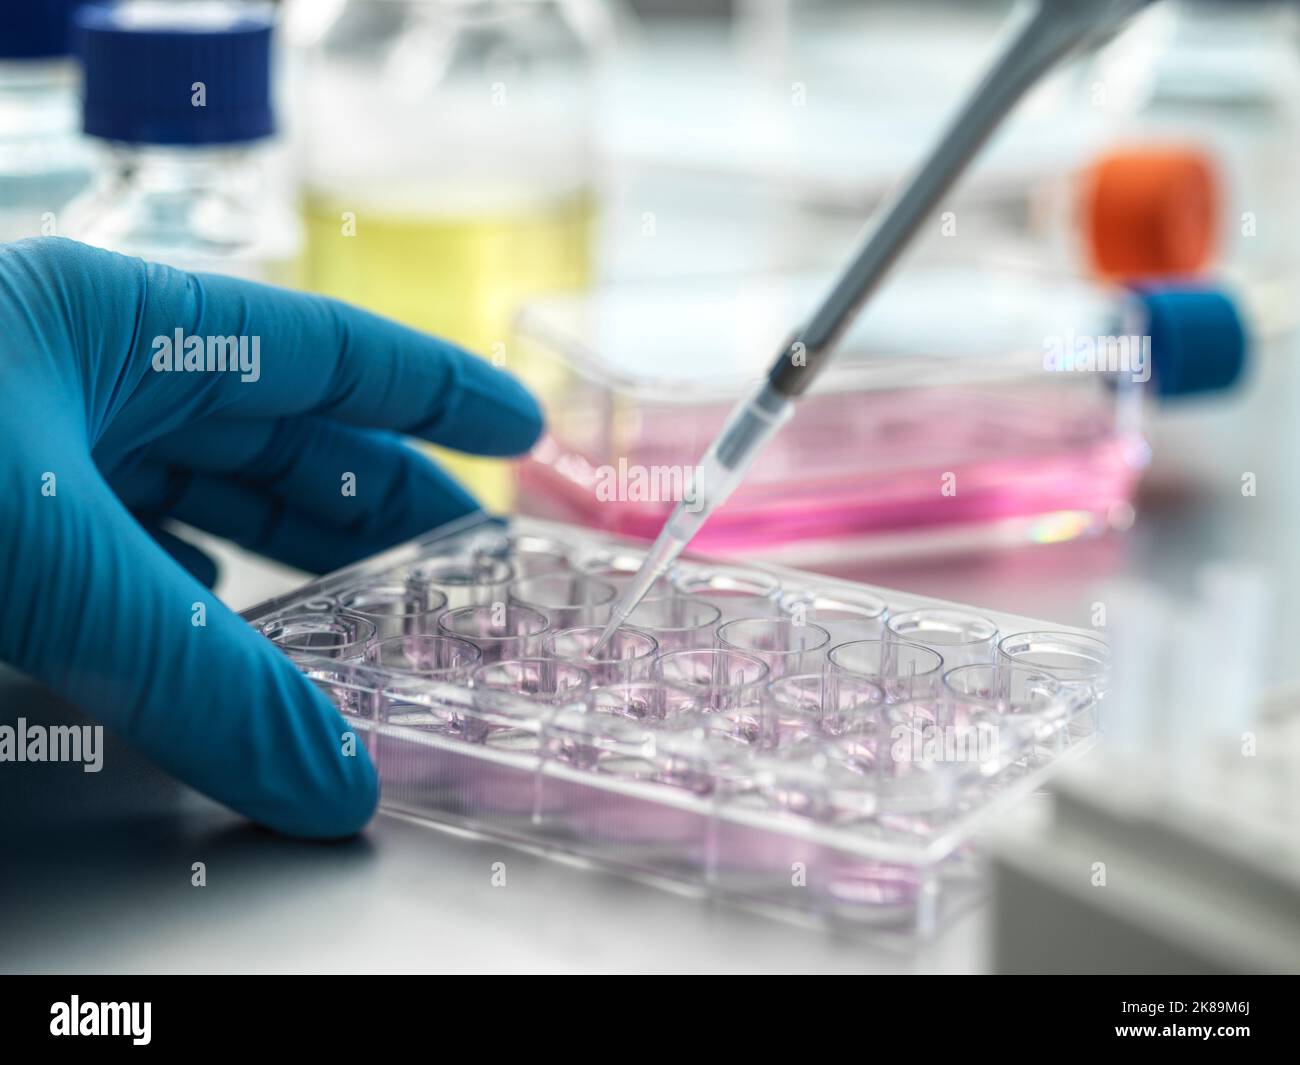 Pharmaceutical research Stock Photo